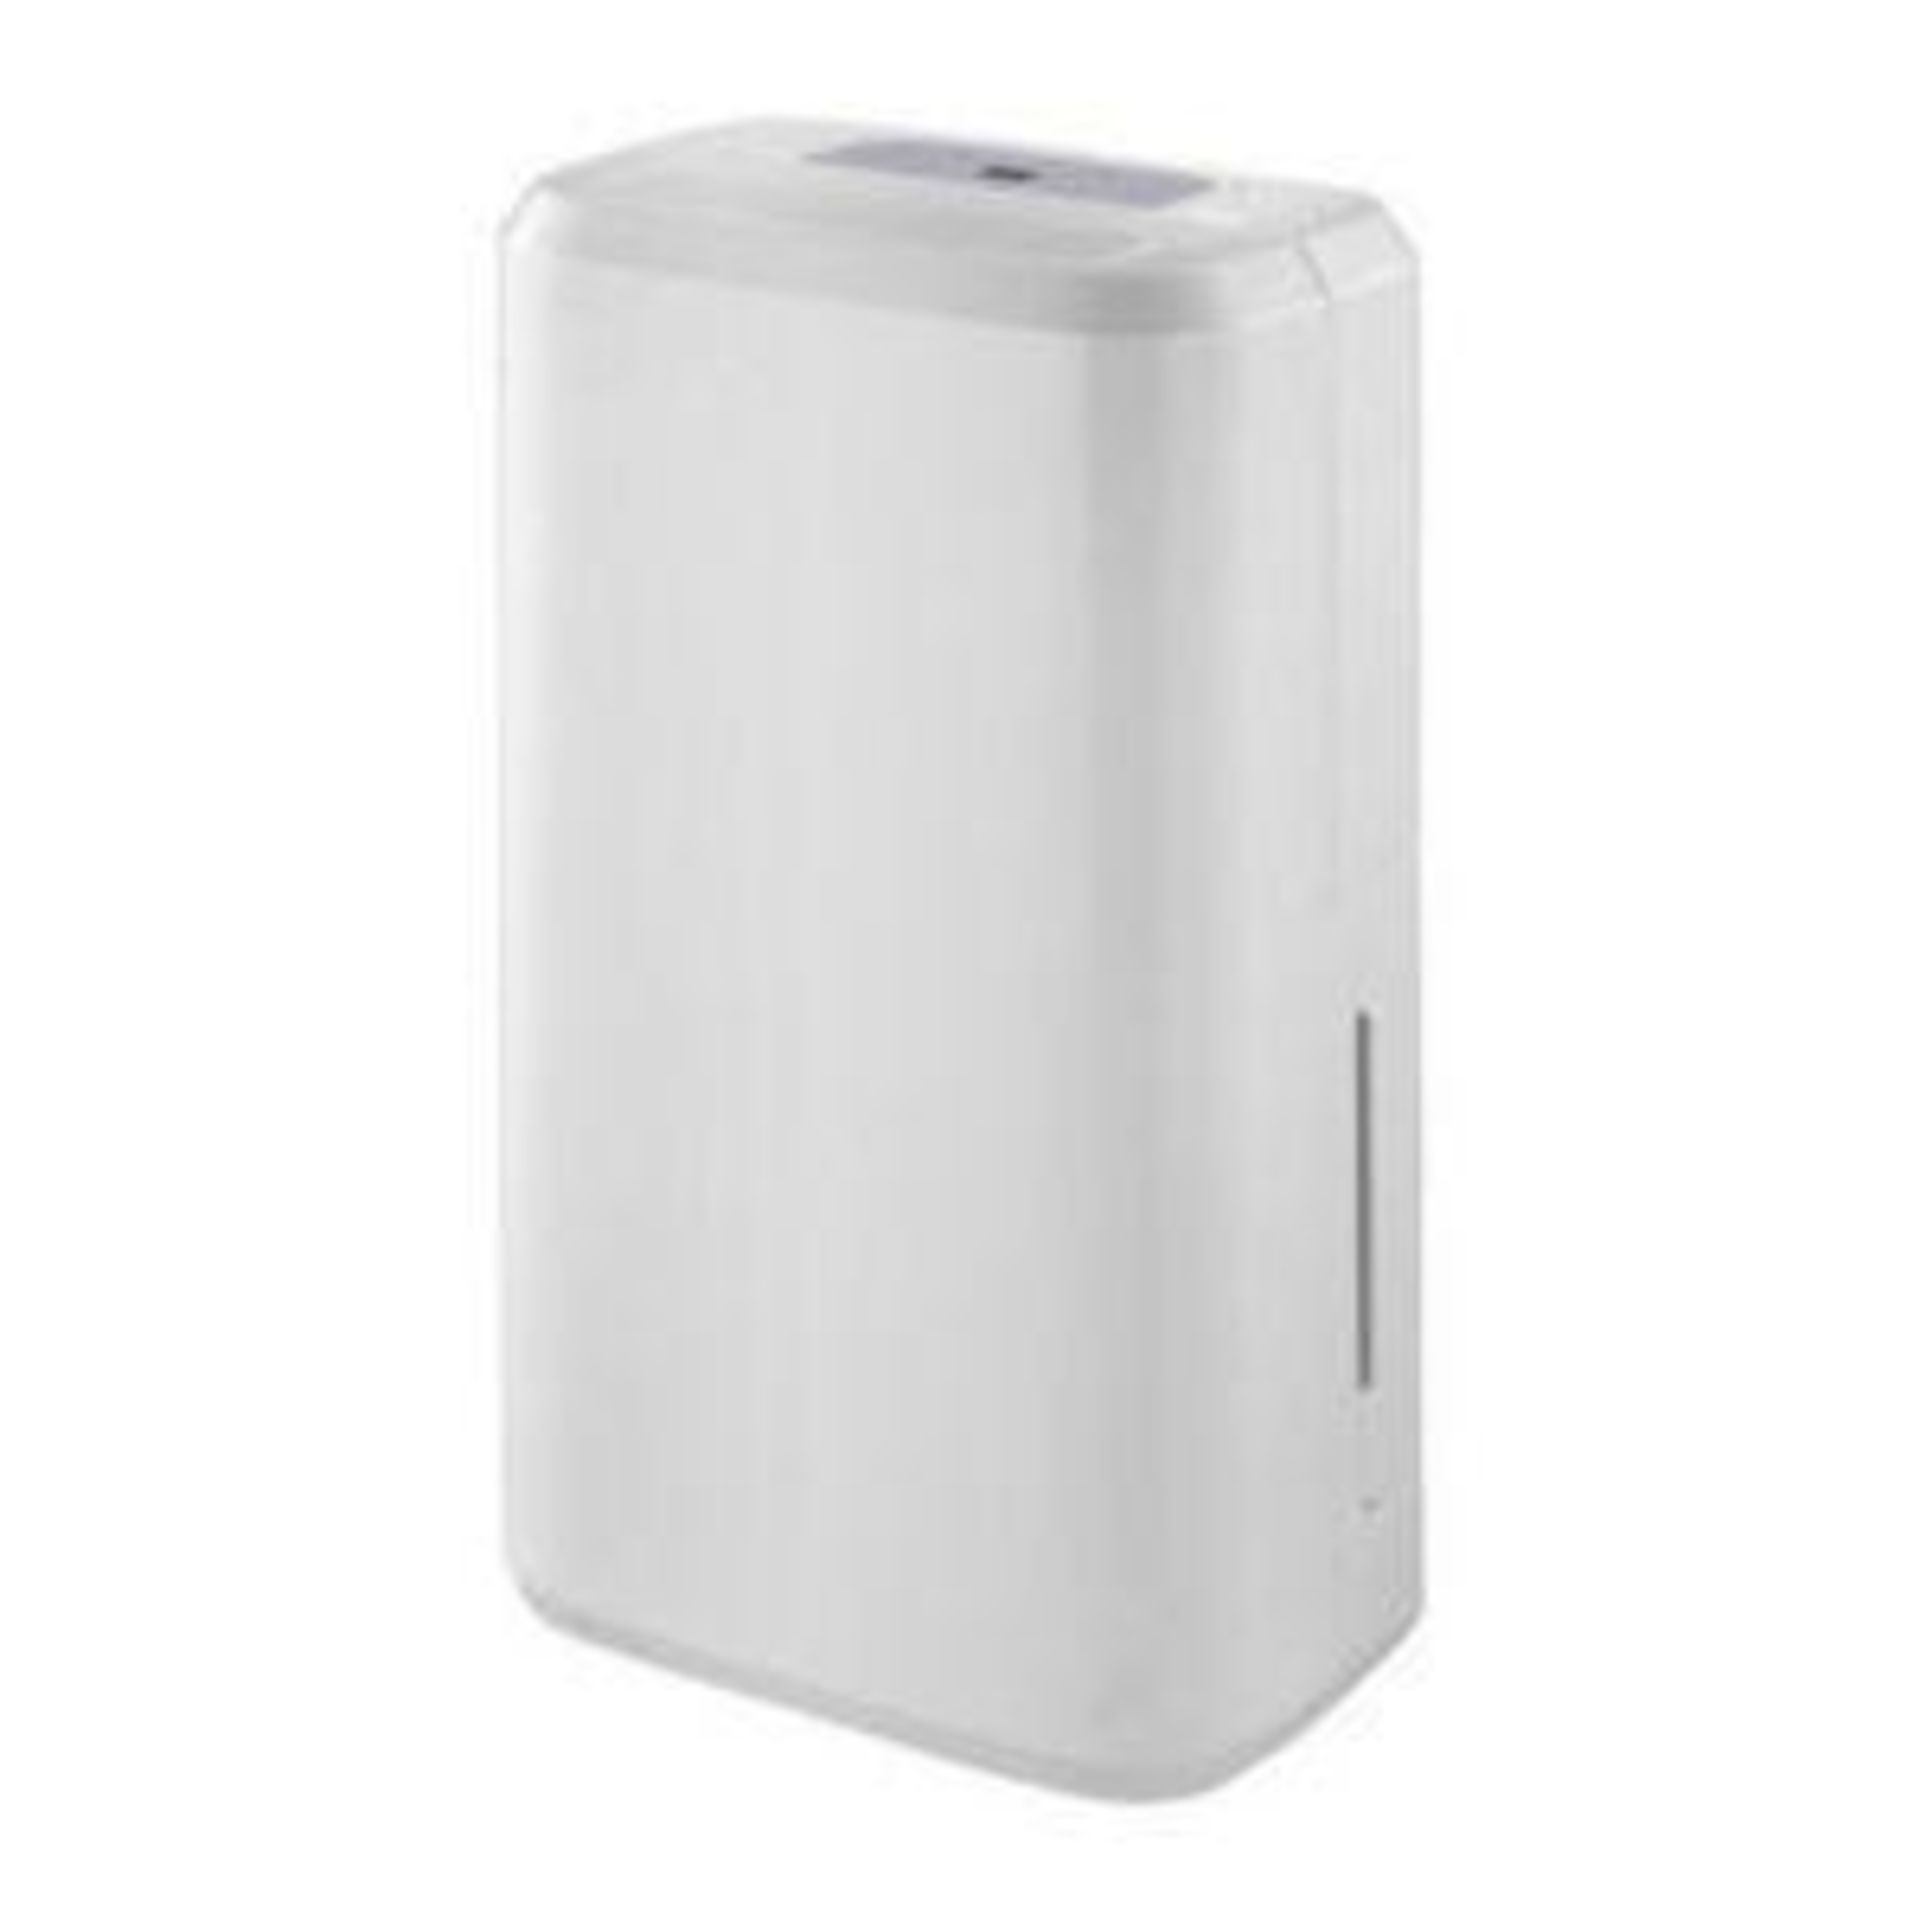 10L Dehumidifier (R47)10L Dehumidifier. This dehumidifier is ideal for removing excess moisture